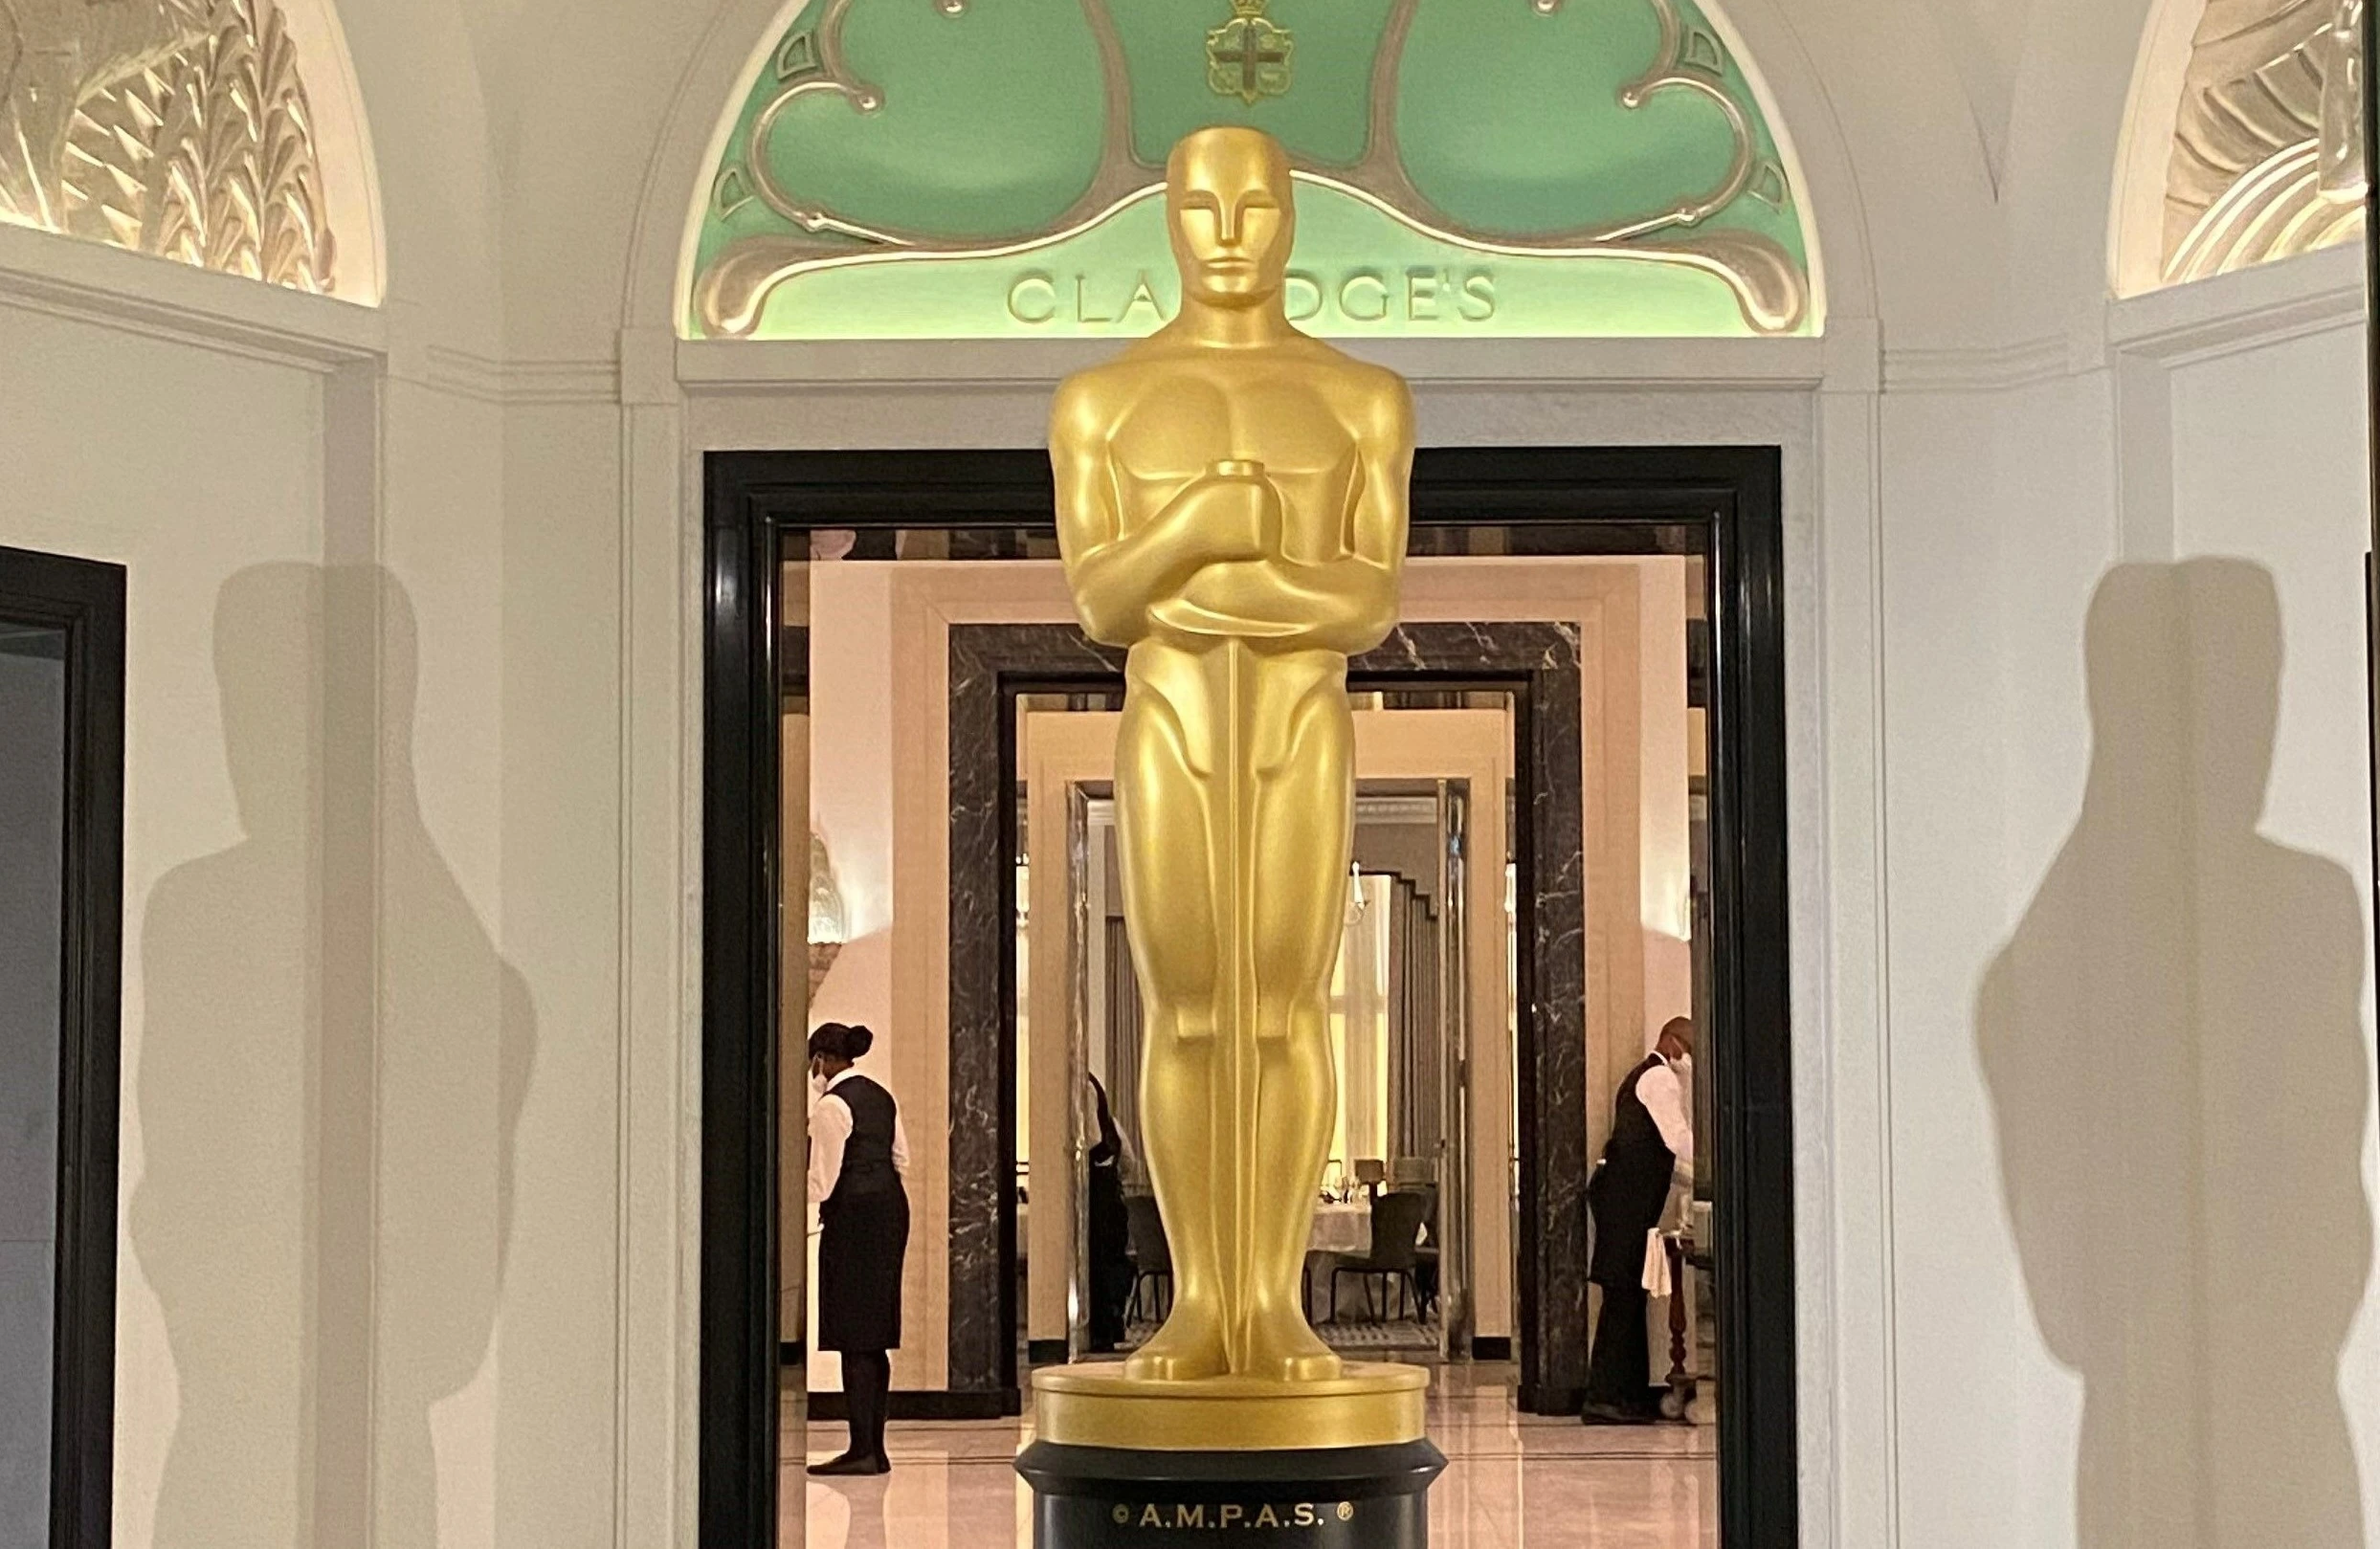 94th Oscars Viewing Party - London